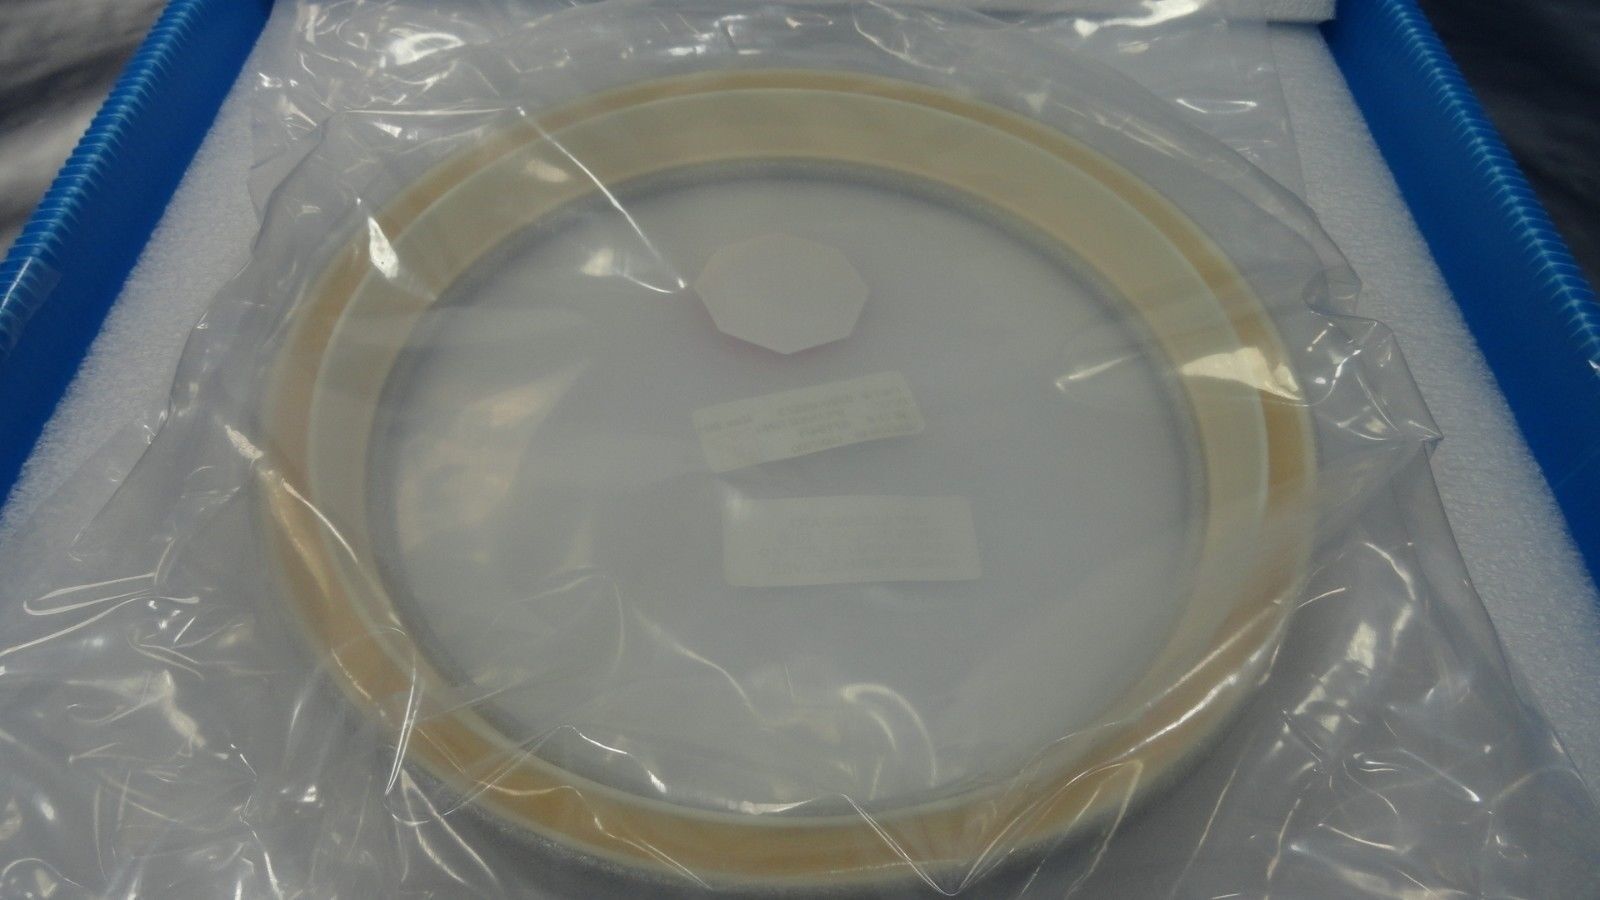 AMAT Applied Materials 0200-00673 8” Cover Ring Endura 200mm Used Working